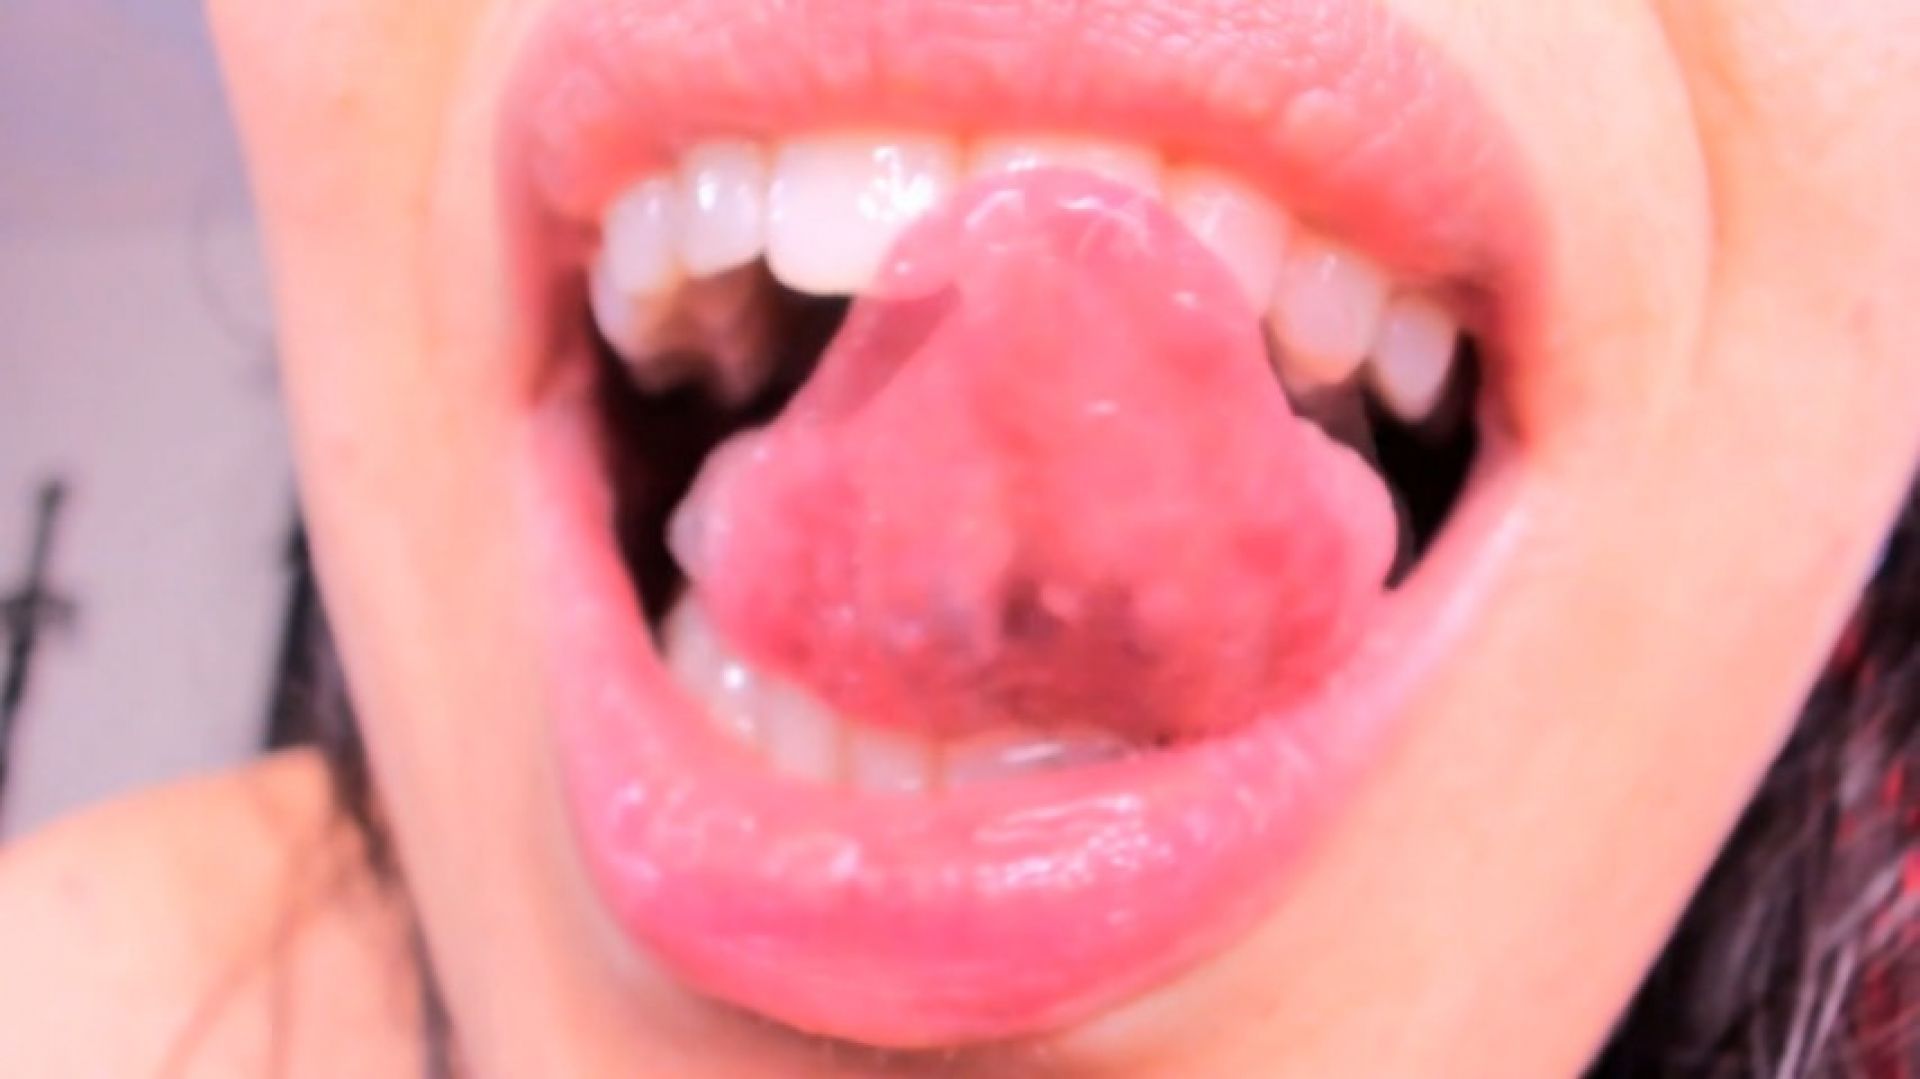 EXTREME MOUTH CLOSE-UP with Teeth &amp; Tongue